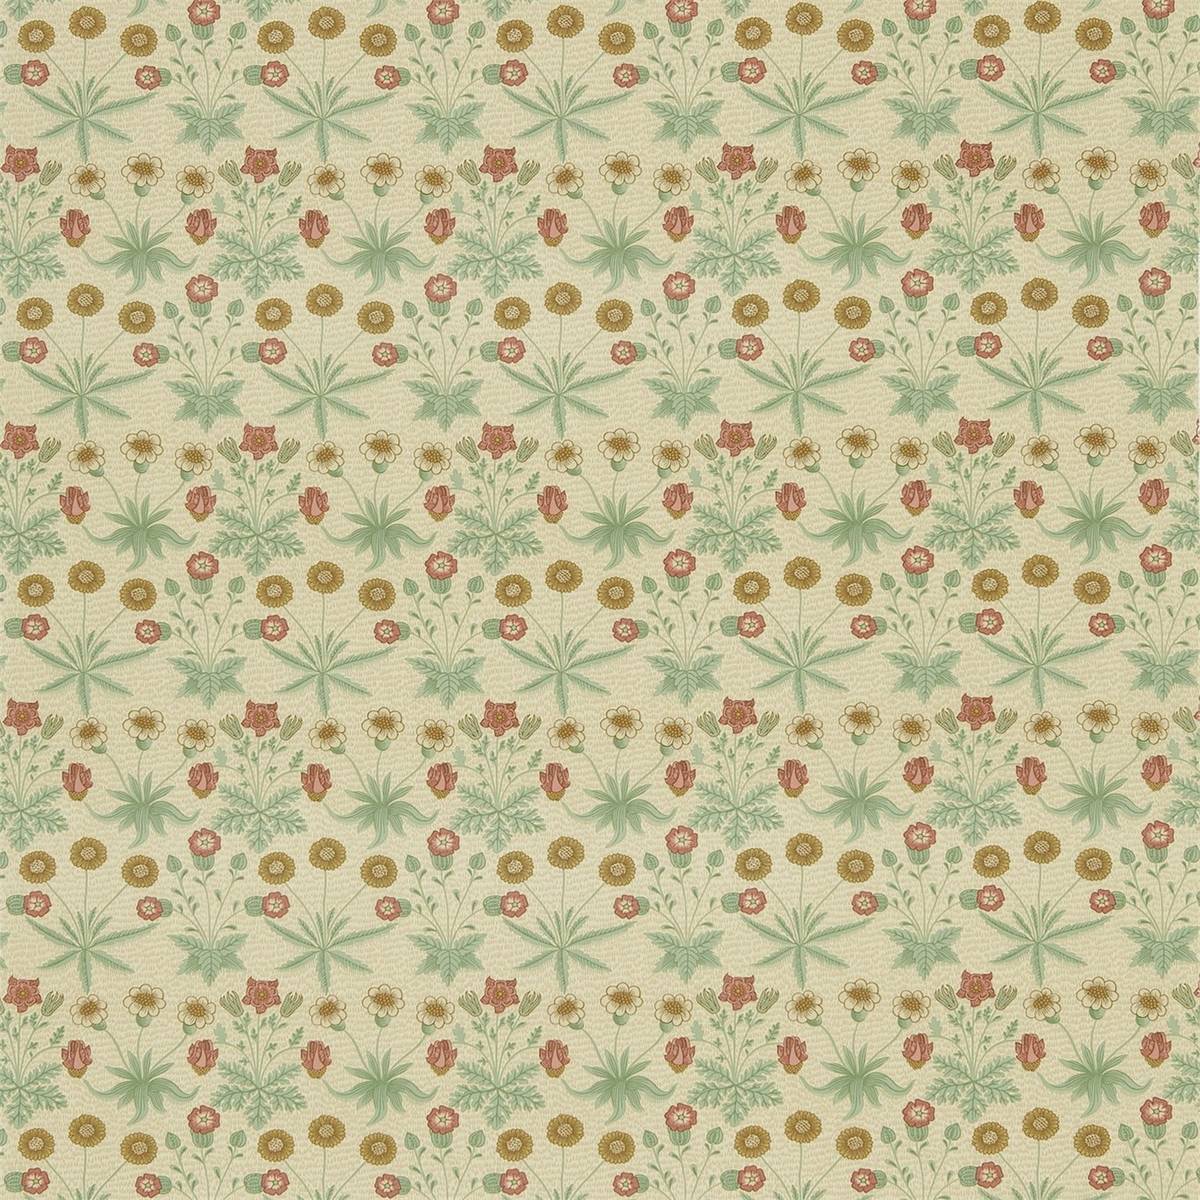 Daisy Terracotta/Gold Fabric by William Morris & Co.